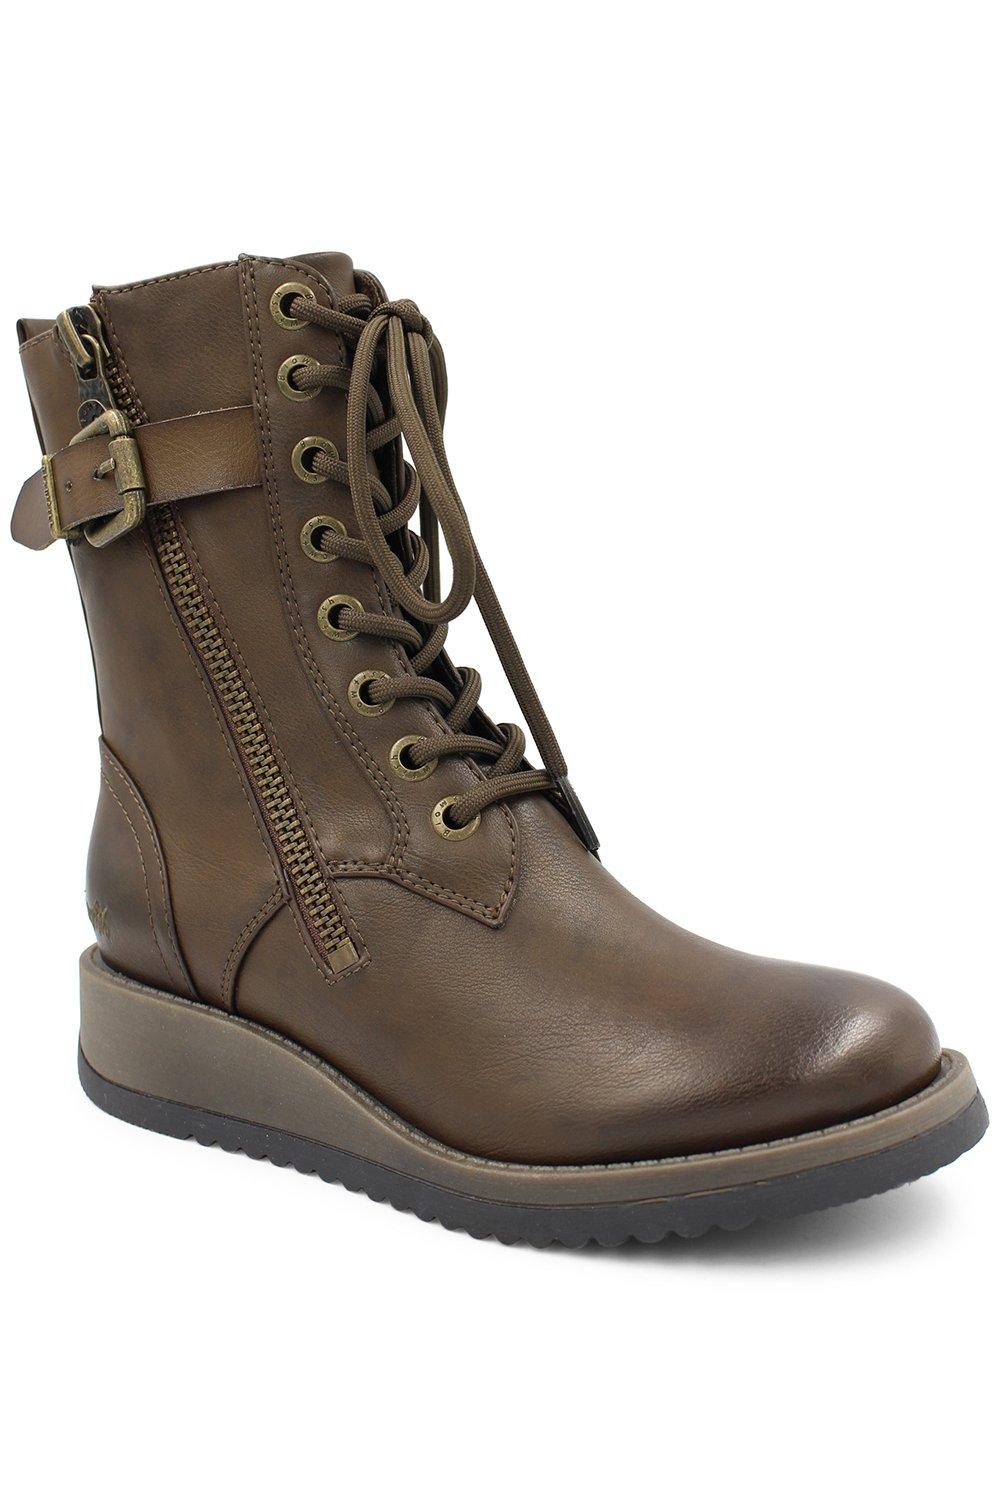 blowfish code tobacco boots - womens - brown - size: 4